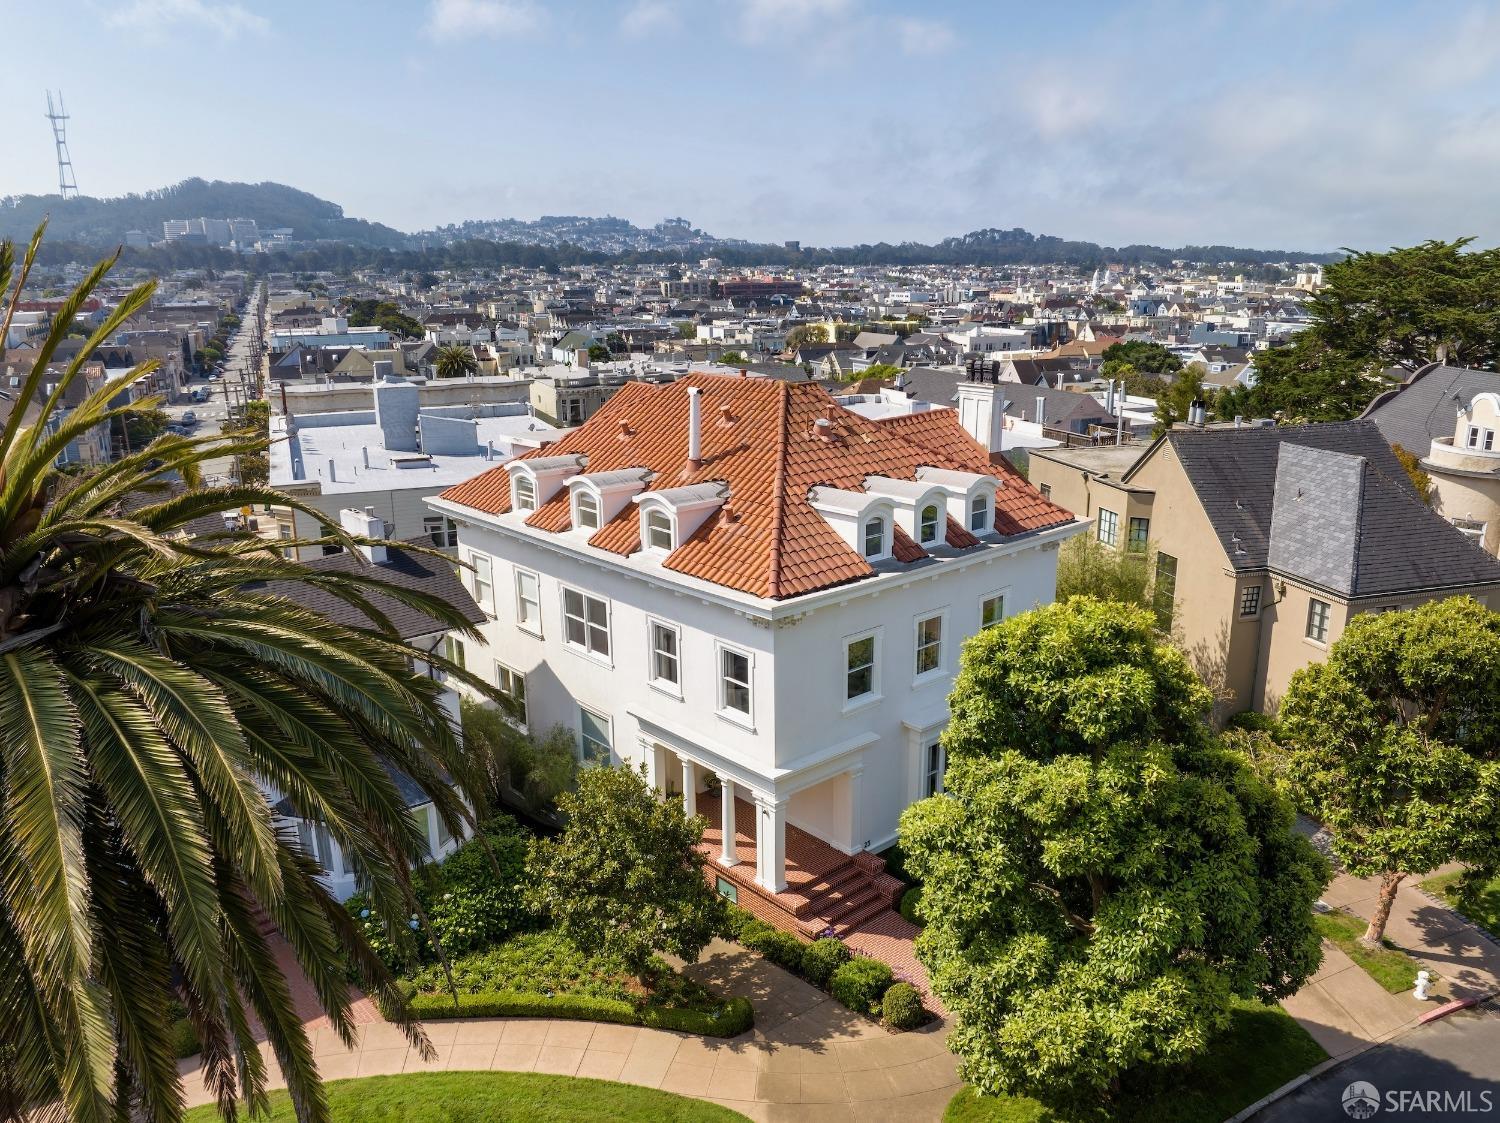 Past the iconic gates of Presidio Terrace, this classic 4-story Edwardian surprises with an elegant modern interior, blending functionality with exquisite finishes. Designed in 1910 by noted Bay Area architect Julius Krafft, the home was flawlessly reimagined & rebuilt in 2013, preserving the formal spaces for entertaining while expanding the footprint for elevated daily living. The home's main level offers a seamless entry hall, formal living room, formal dining w/ fireplace, library w/ balcony overlooking the yard, and open-concept kitchen w/ family lounge & dining. The second level is a sprawling primary suite w/ bed, bath, private terrace w/ hot tub, lounge, and dual offices (optional bedrooms). The third level includes 3 additional bedrooms & baths, plus bonus family room w/ sweeping southern city views. The lower garden level boasts a gym, steam/sauna room, guest suite, wine cellar, and media/rec room opening to the backyard w/ putting green, brick patio, mature bamboo, spiral staircase to upper level, and access to a 2+ car garage. Located in the sought-after yet rarely available enclave of Presidio Terrace w/ private security, well-maintained street & landscaping, and abundant parking, this meticulously finished home has everything needed for today's modern lifestyle.